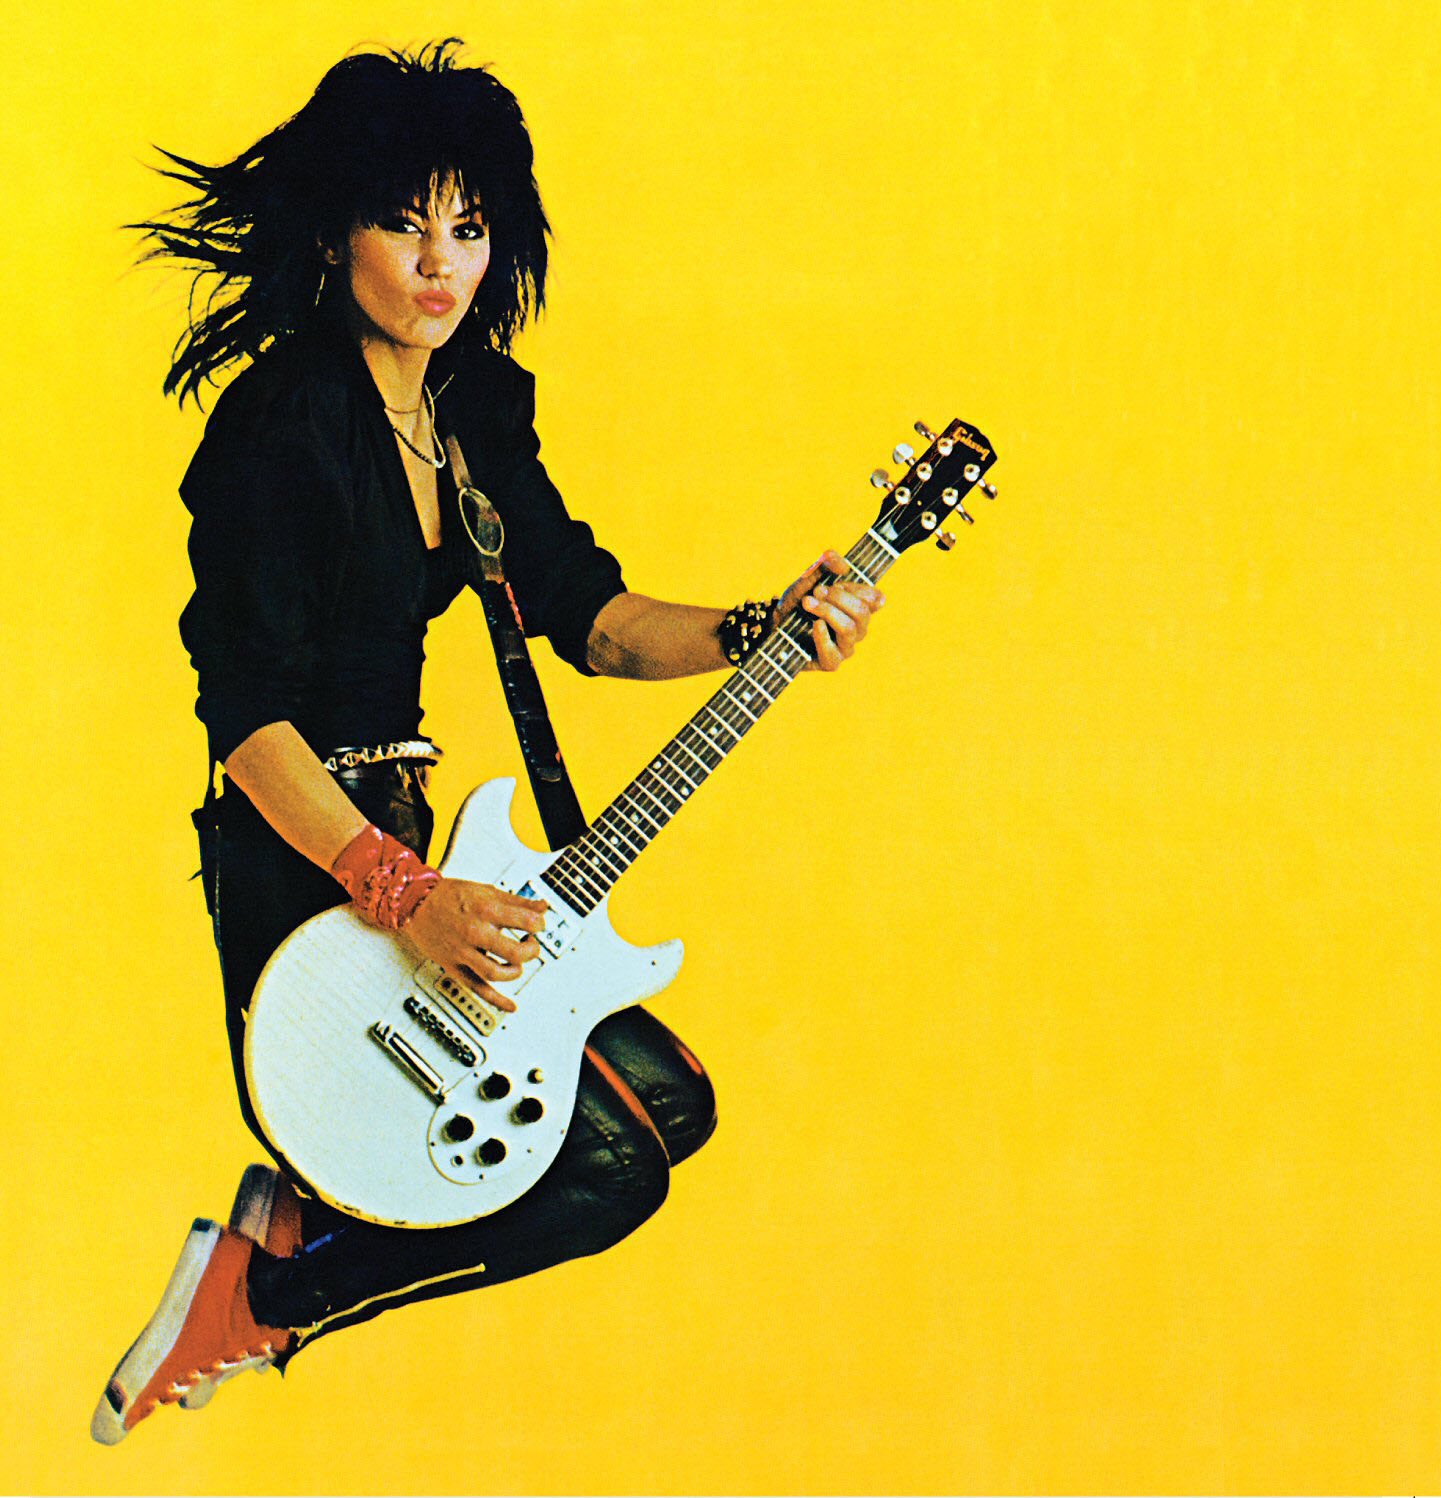 A big SHOUT out to the queen - Happy birthday to the one & only Joan Jett!!! 